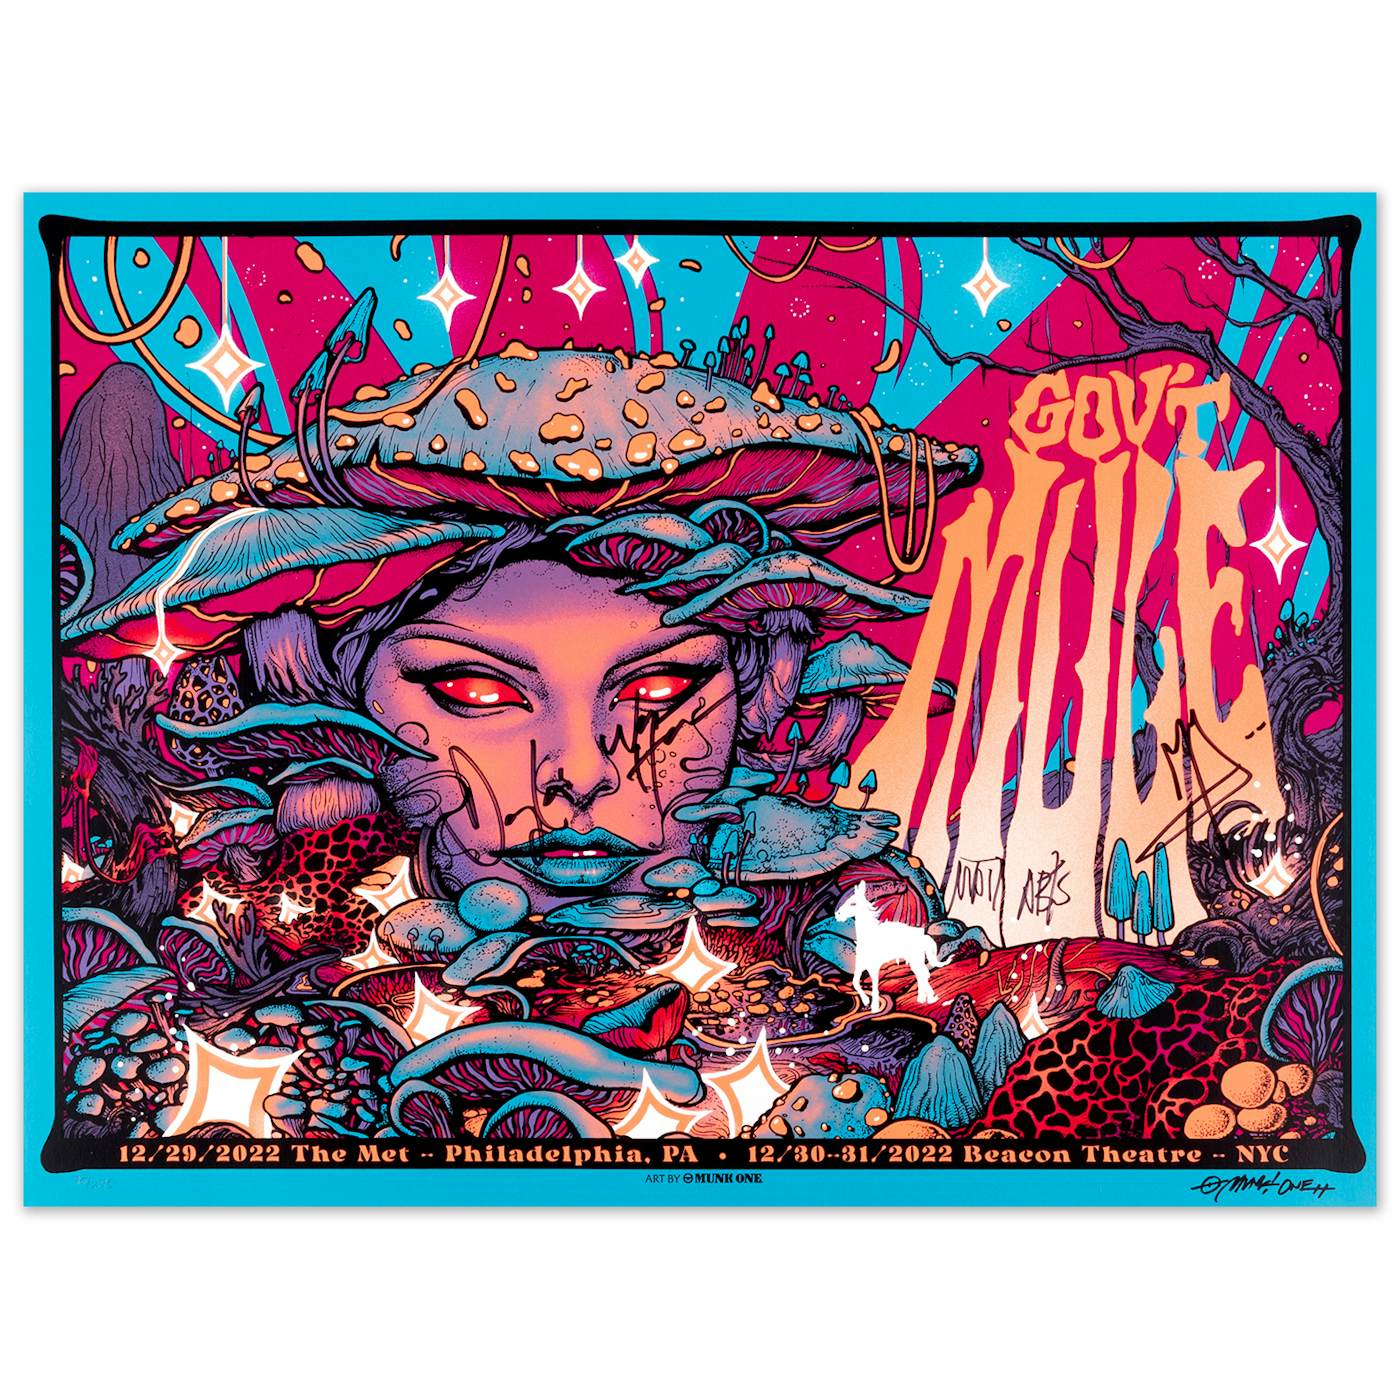 Gov't Mule NEW YEAR’S RUN 2022-2023 POSTER - MUNK ONE (SIGNED)